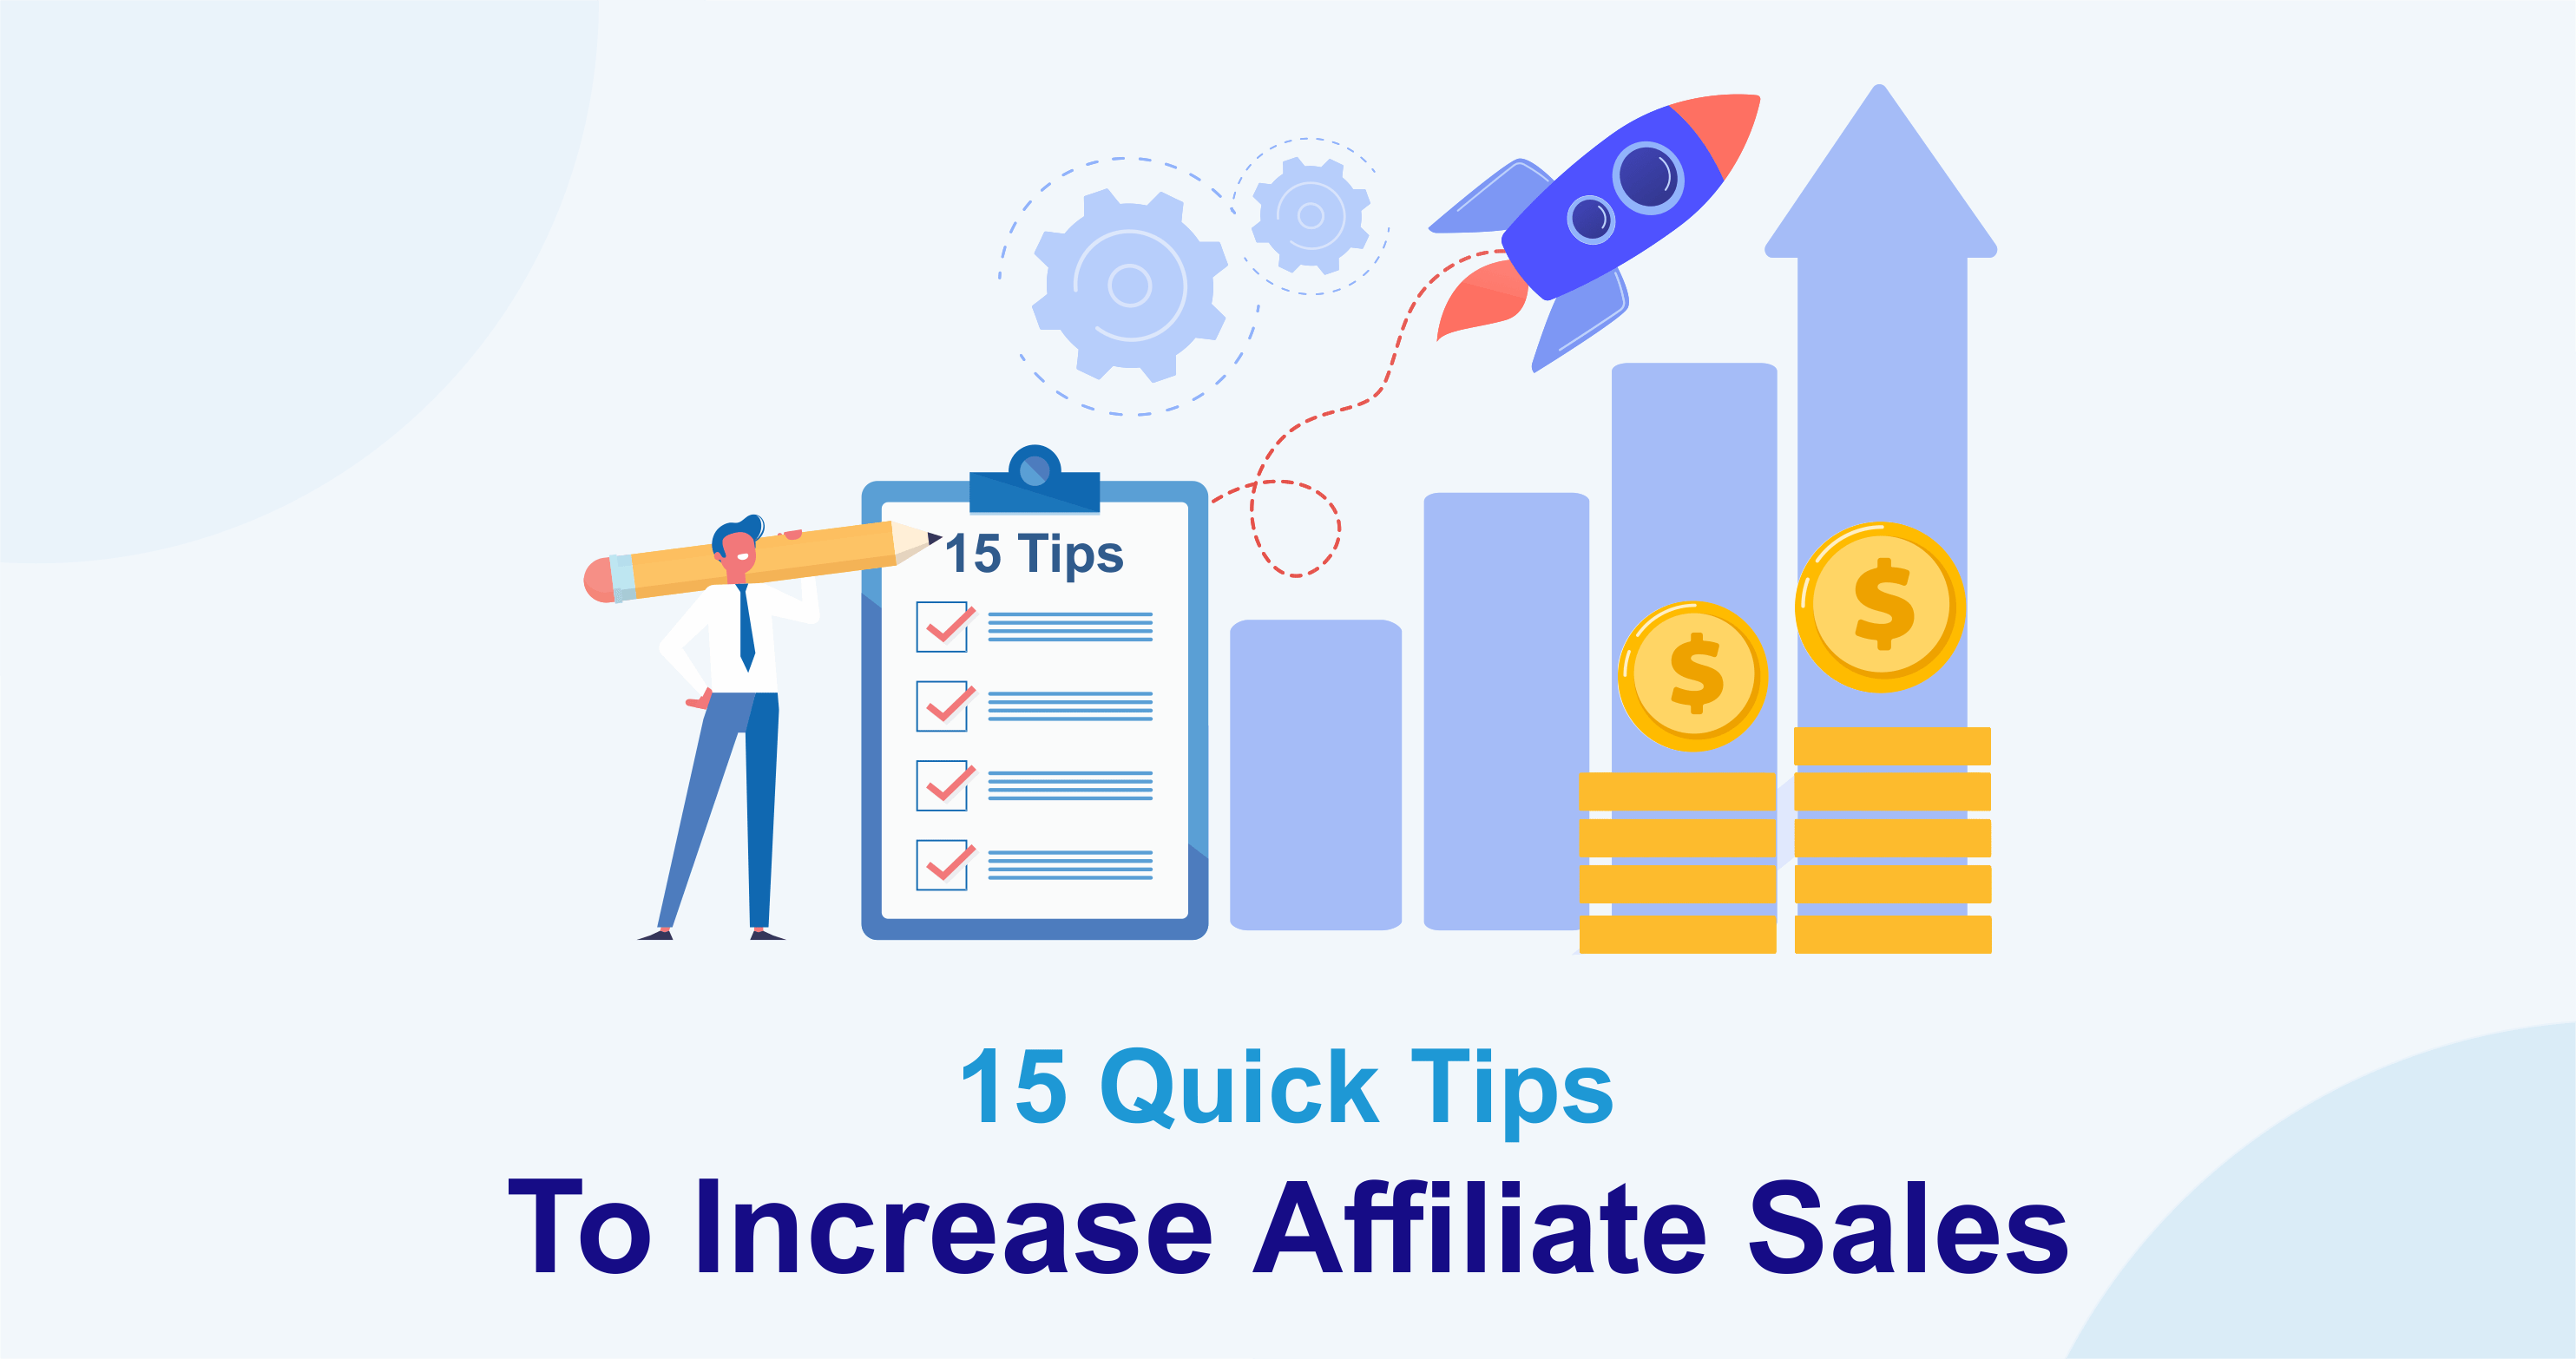 15 quick tips to increase affiliate sales in 2022